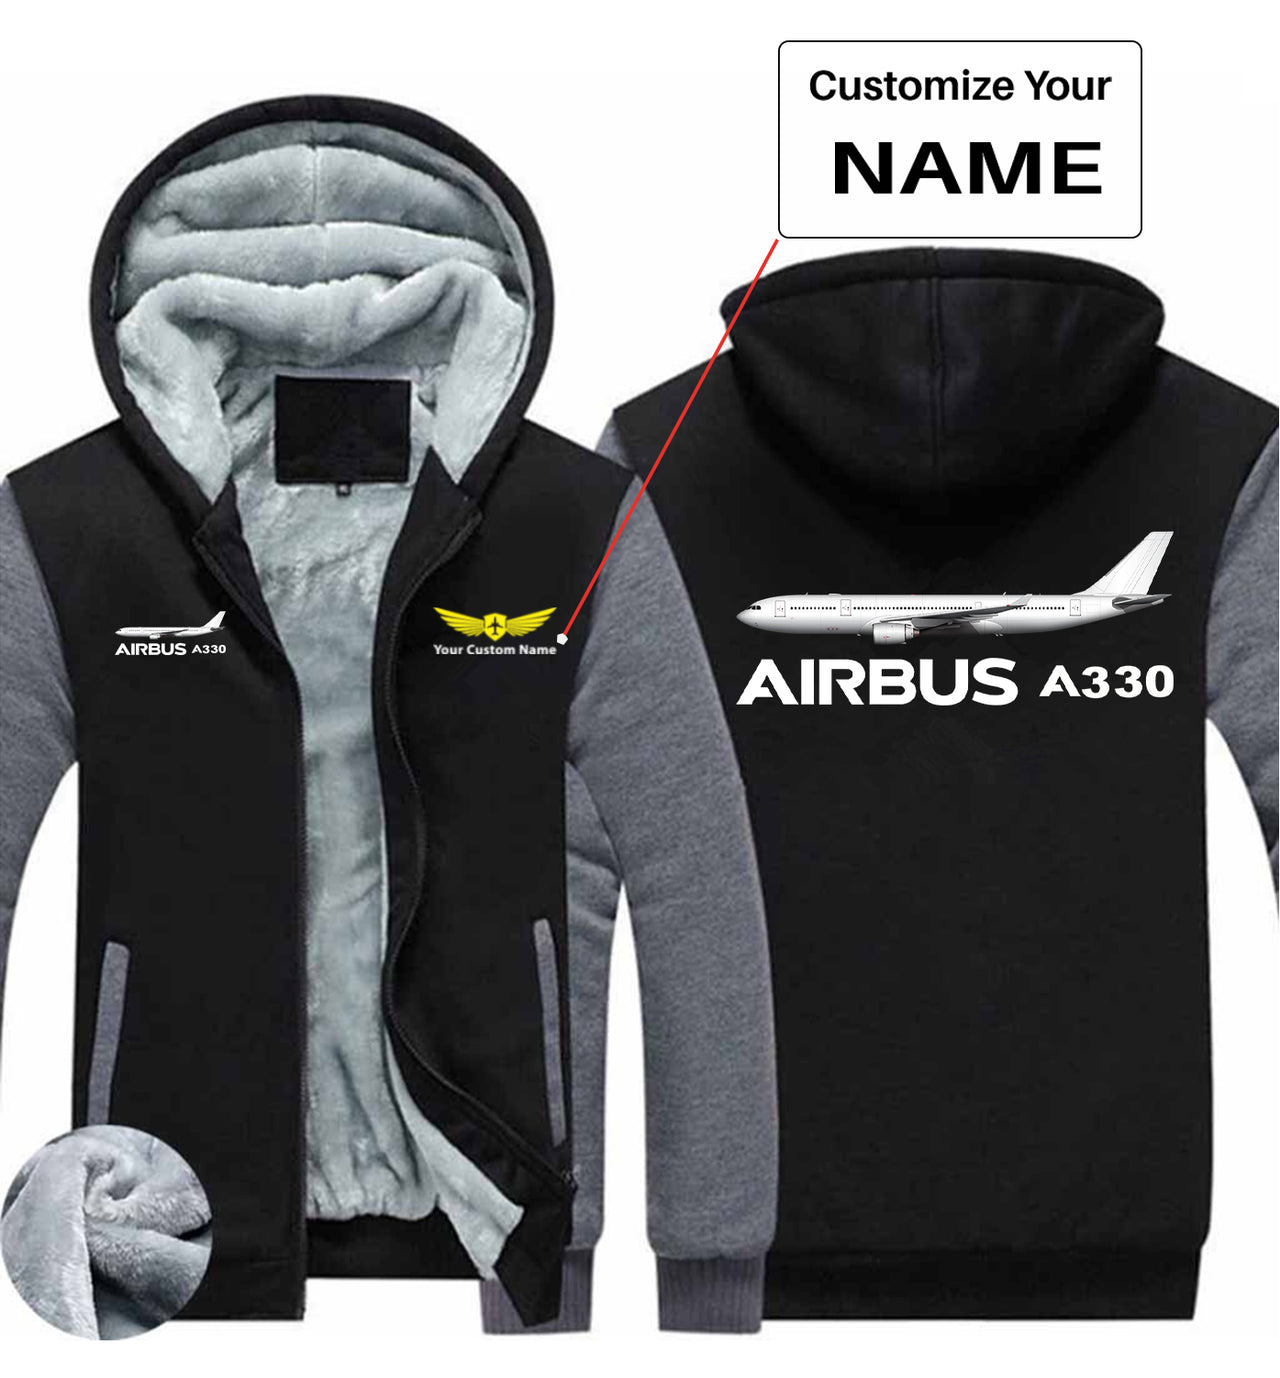 The Airbus A330 Designed Zipped Sweatshirts